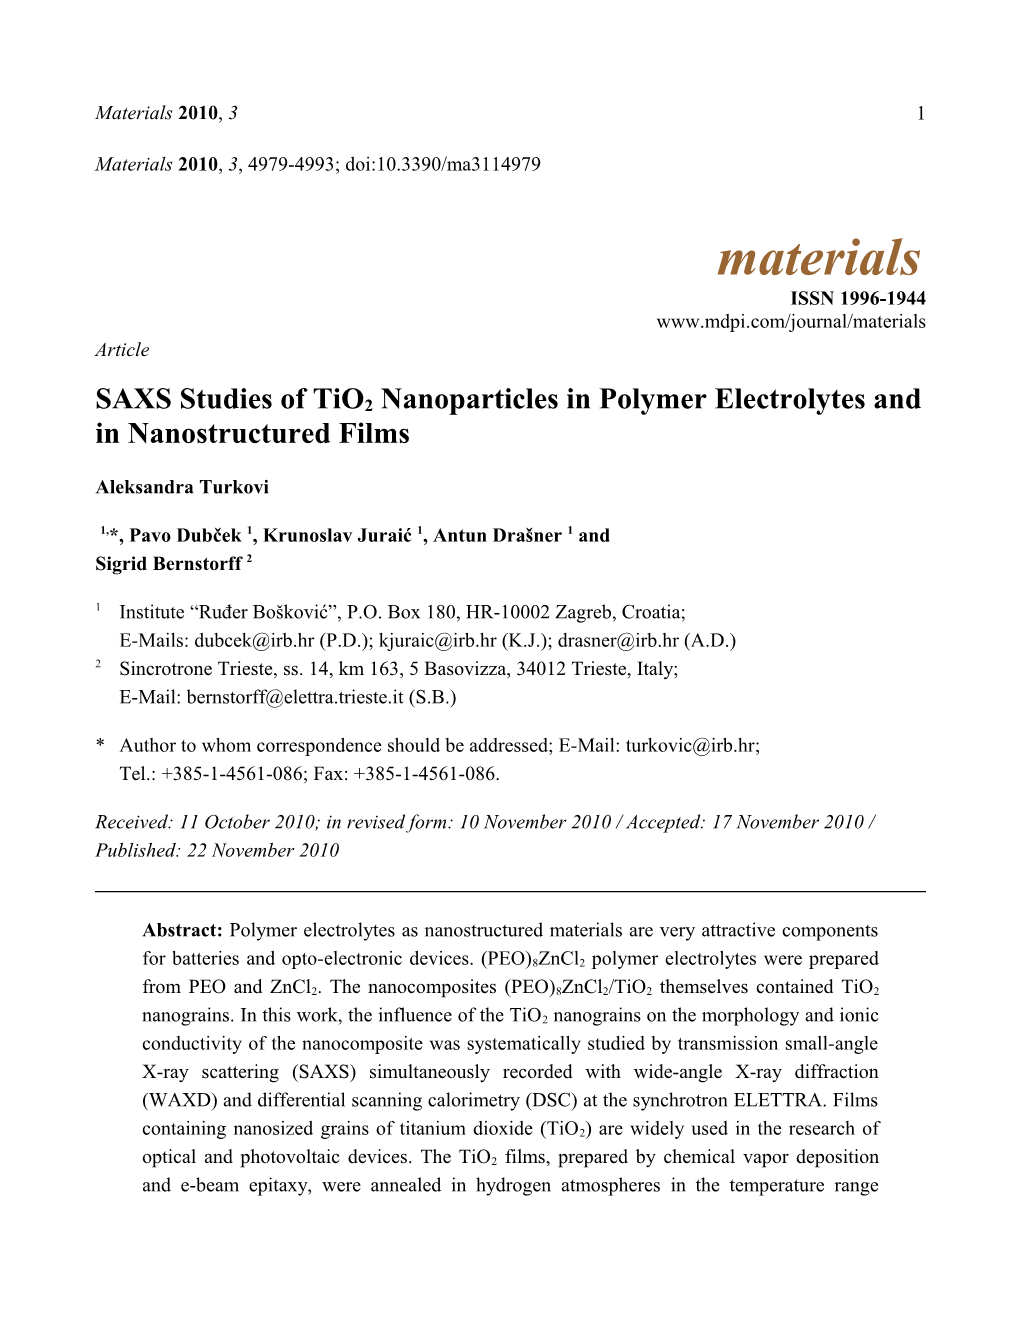 SAXS Studies of Tio2nanoparticles in Polymer Electrolytes and in Nanostructured Films